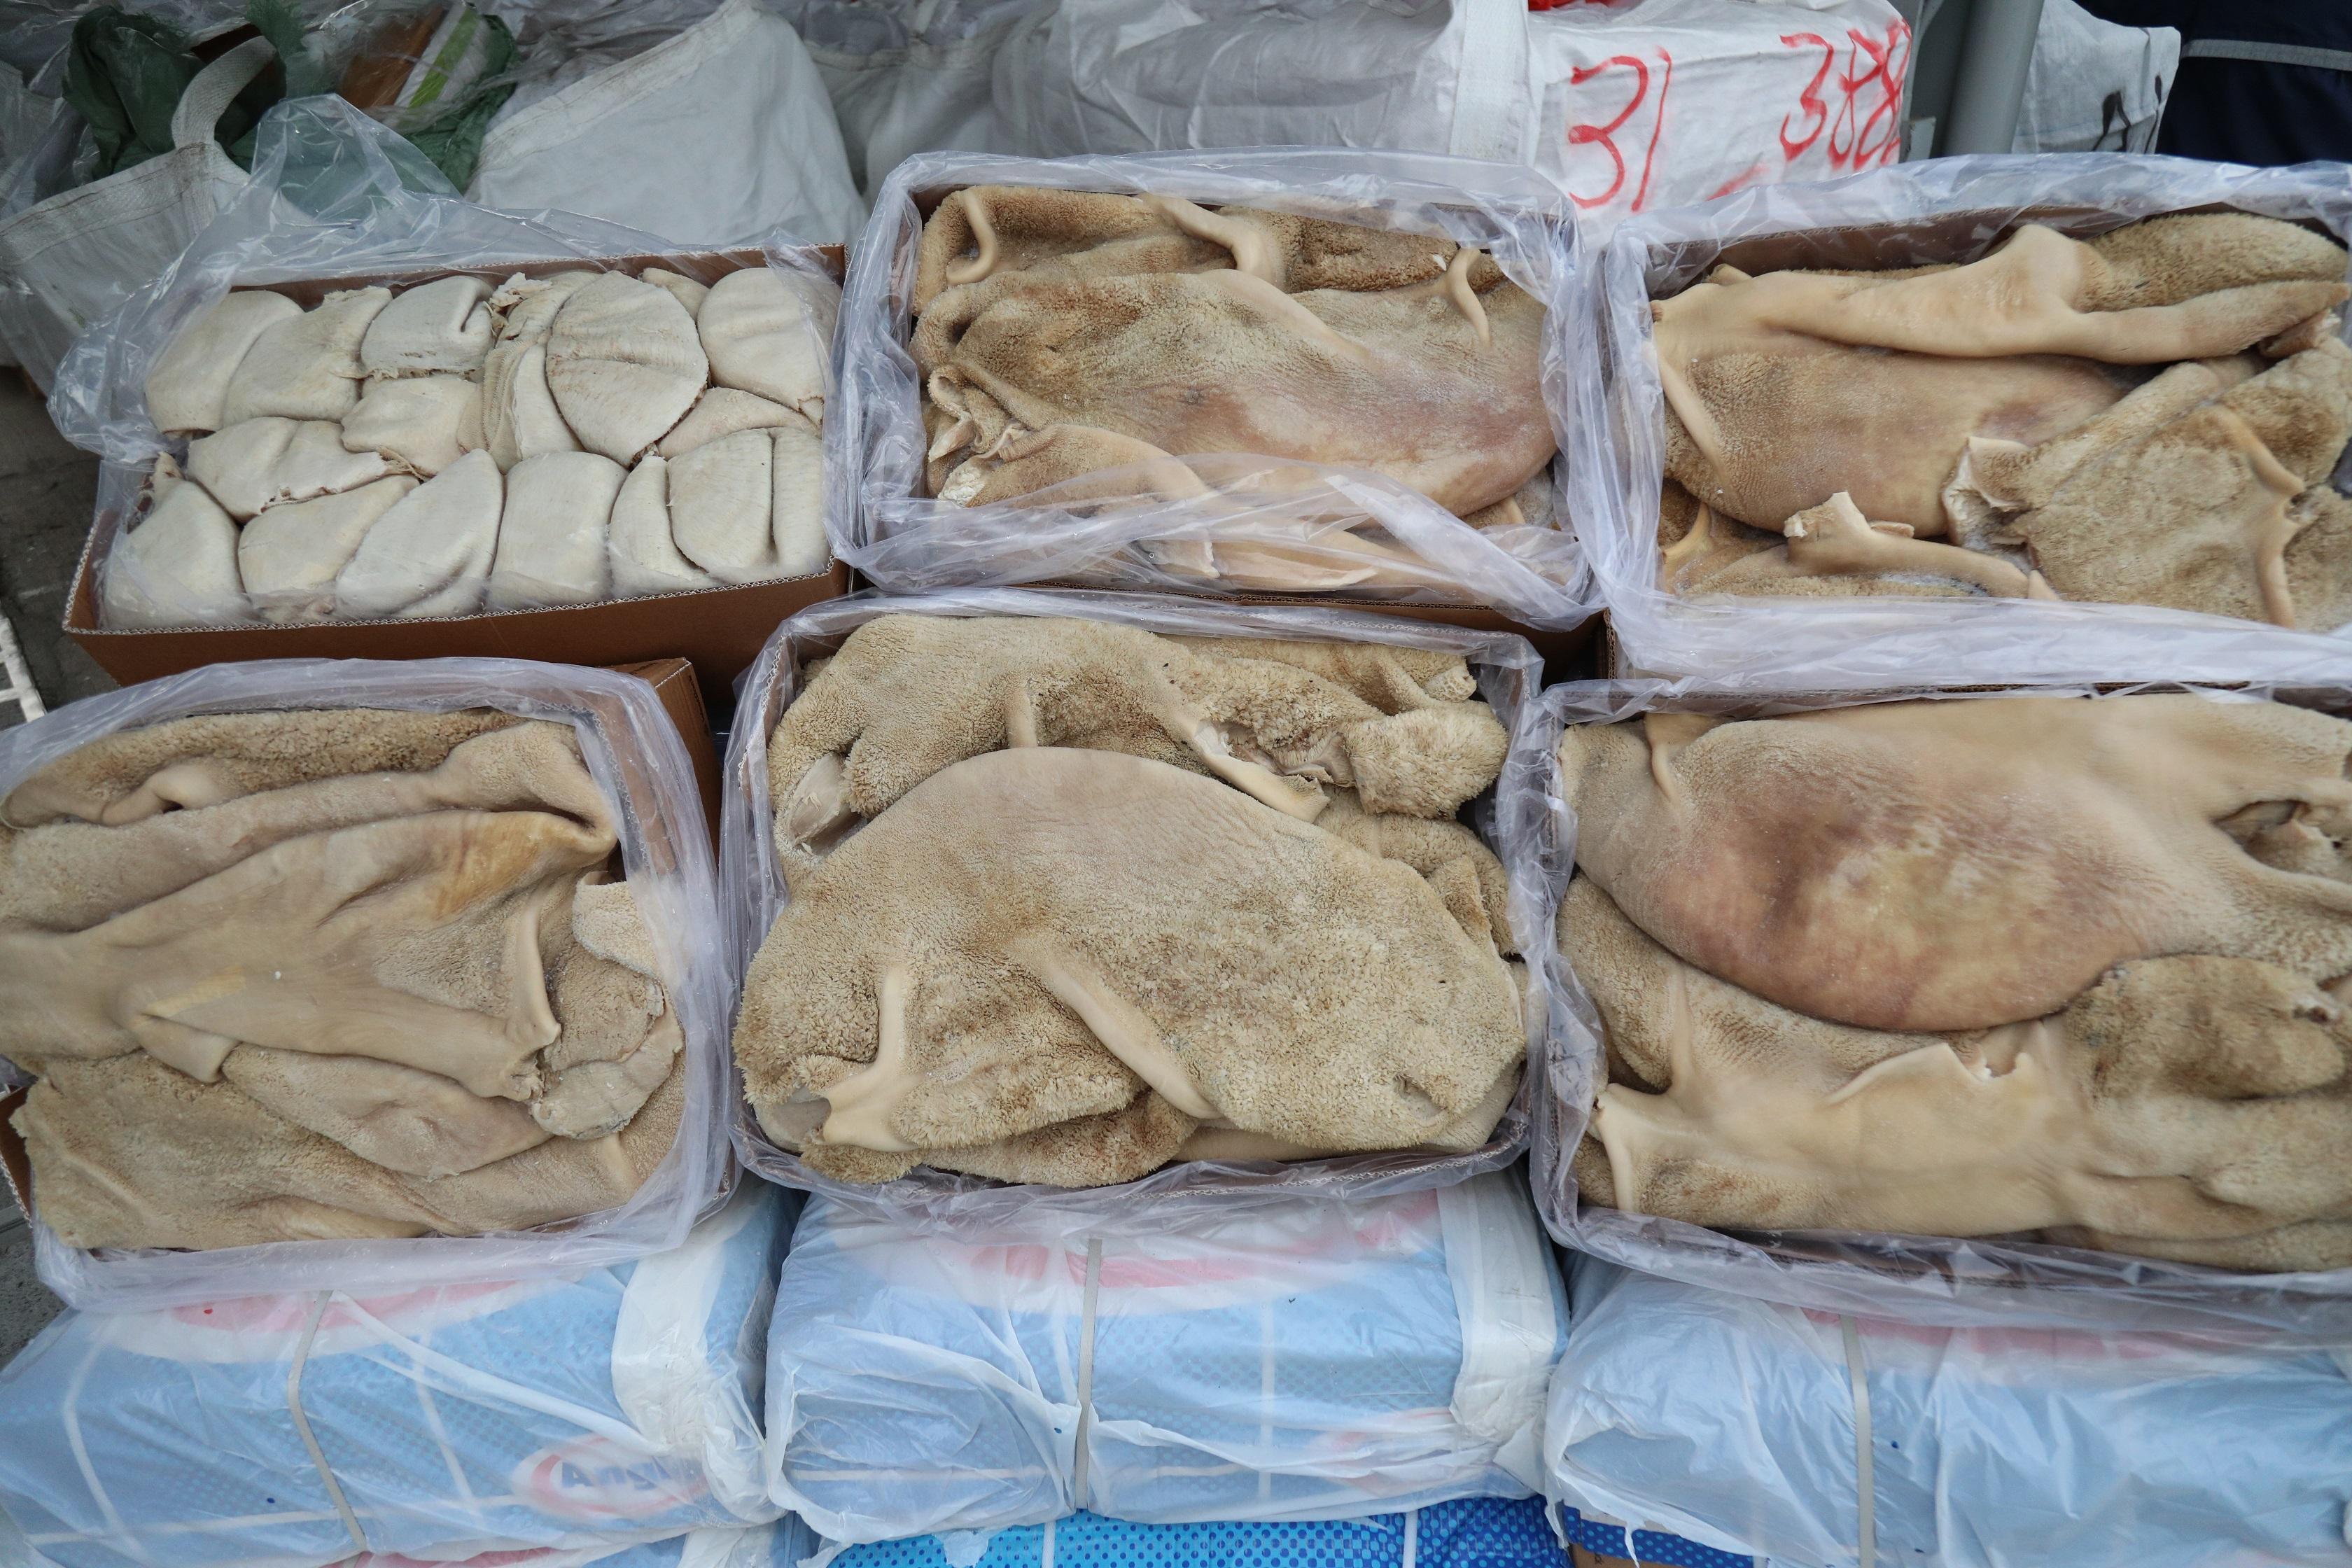 Hong Kong Customs yesterday (January 13) mounted an anti-smuggling operation in the south-western waters of Hong Kong and detected a suspected smuggling case involving a cargo vessel. About 35 tonnes of suspected smuggled frozen meat with an estimated market value of about $5.2 million were seized. Photo shows some of the suspected smuggled frozen meat seized.